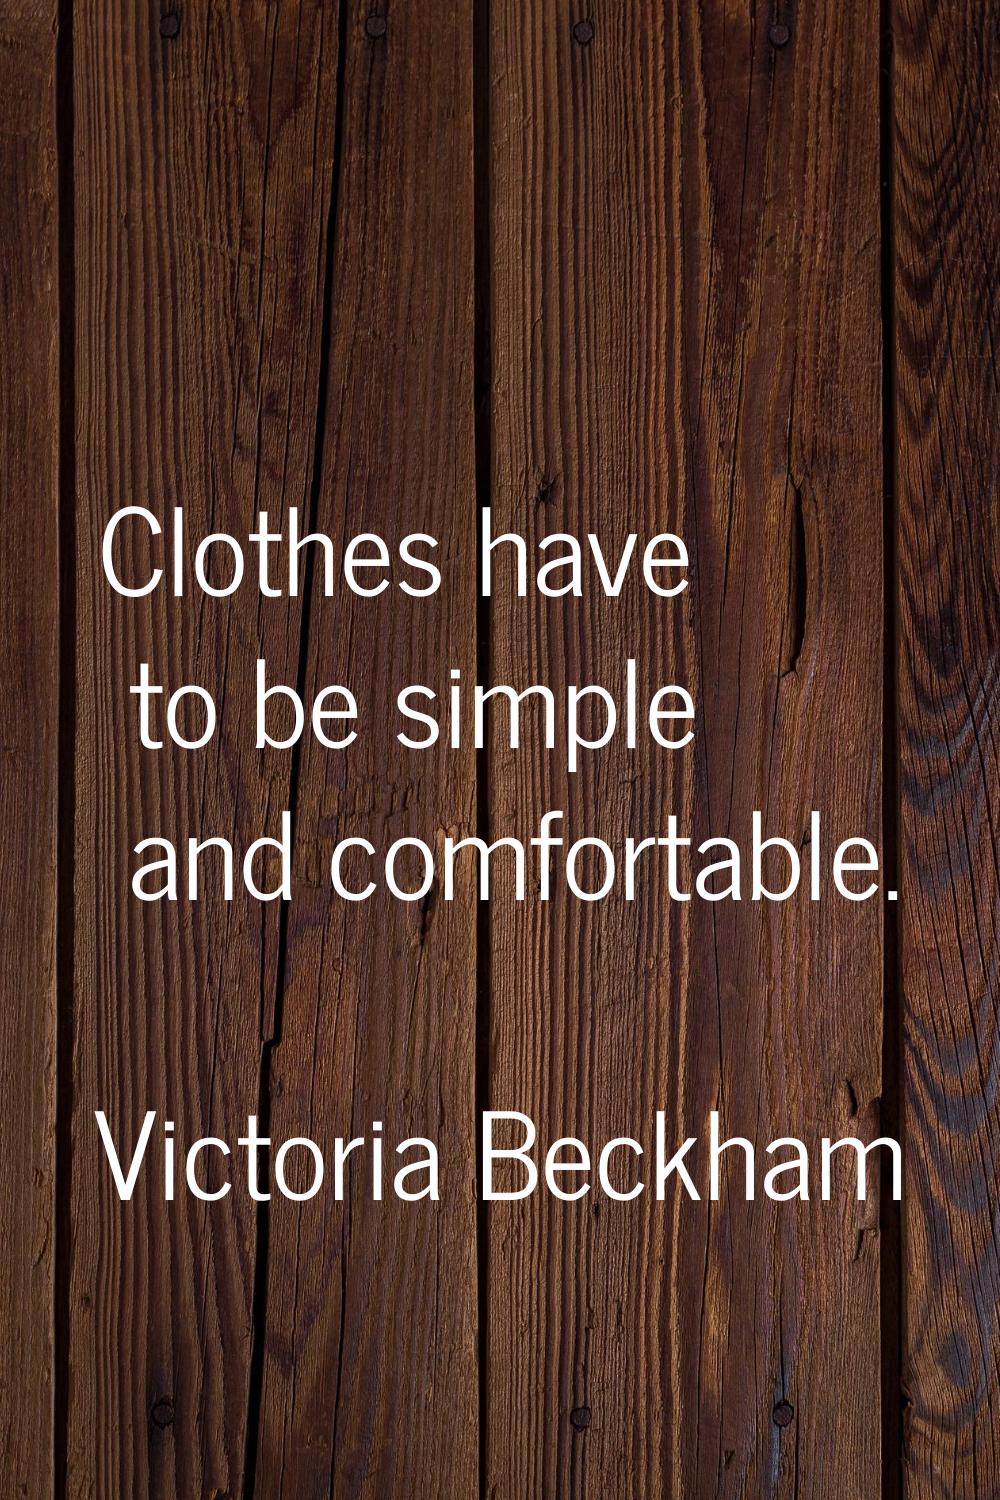 Clothes have to be simple and comfortable.